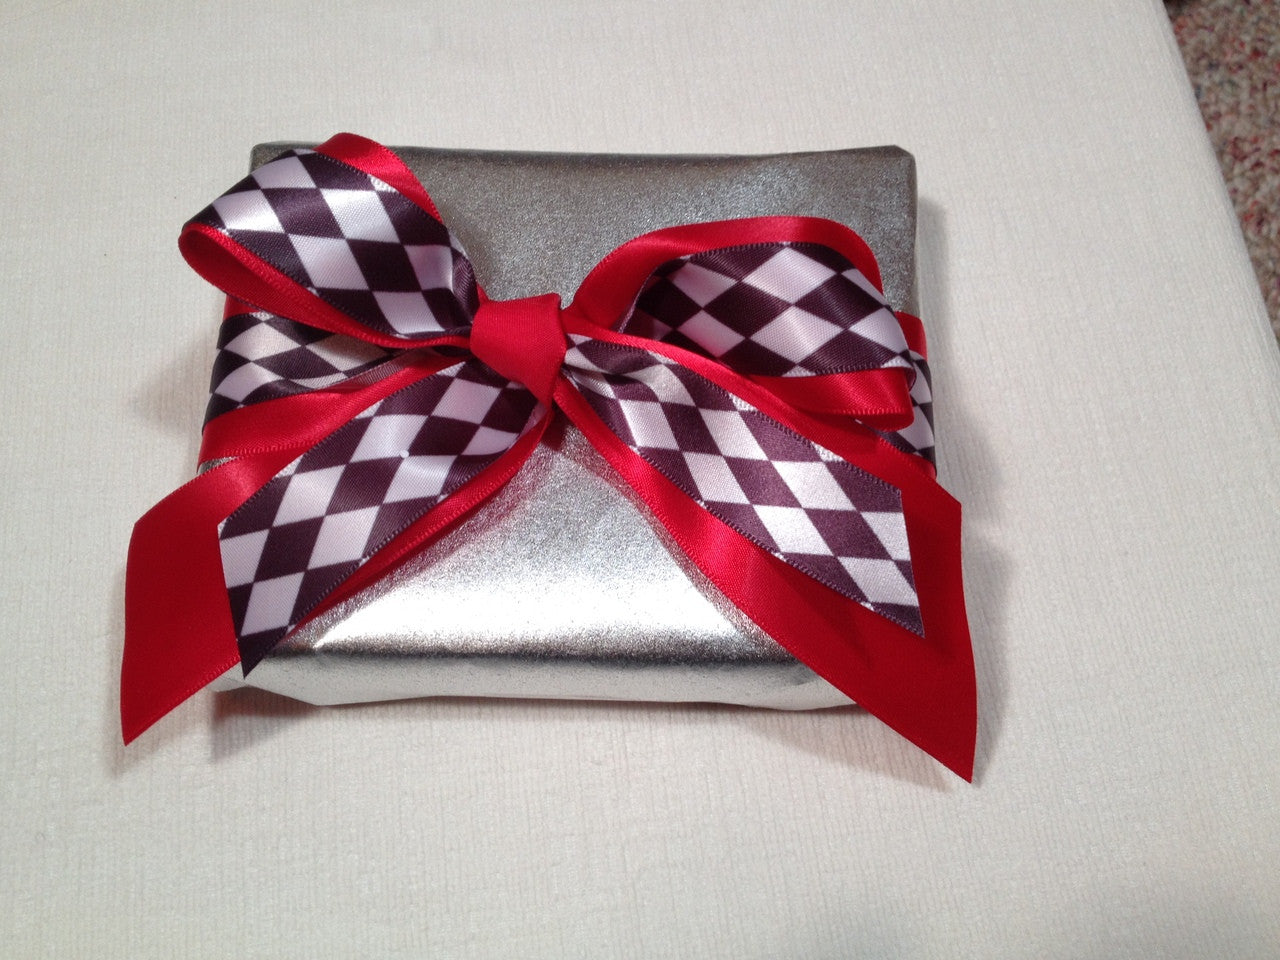 This simple little package is tied with red satin and our black and white harlequin looks so elegant tied in a bow!